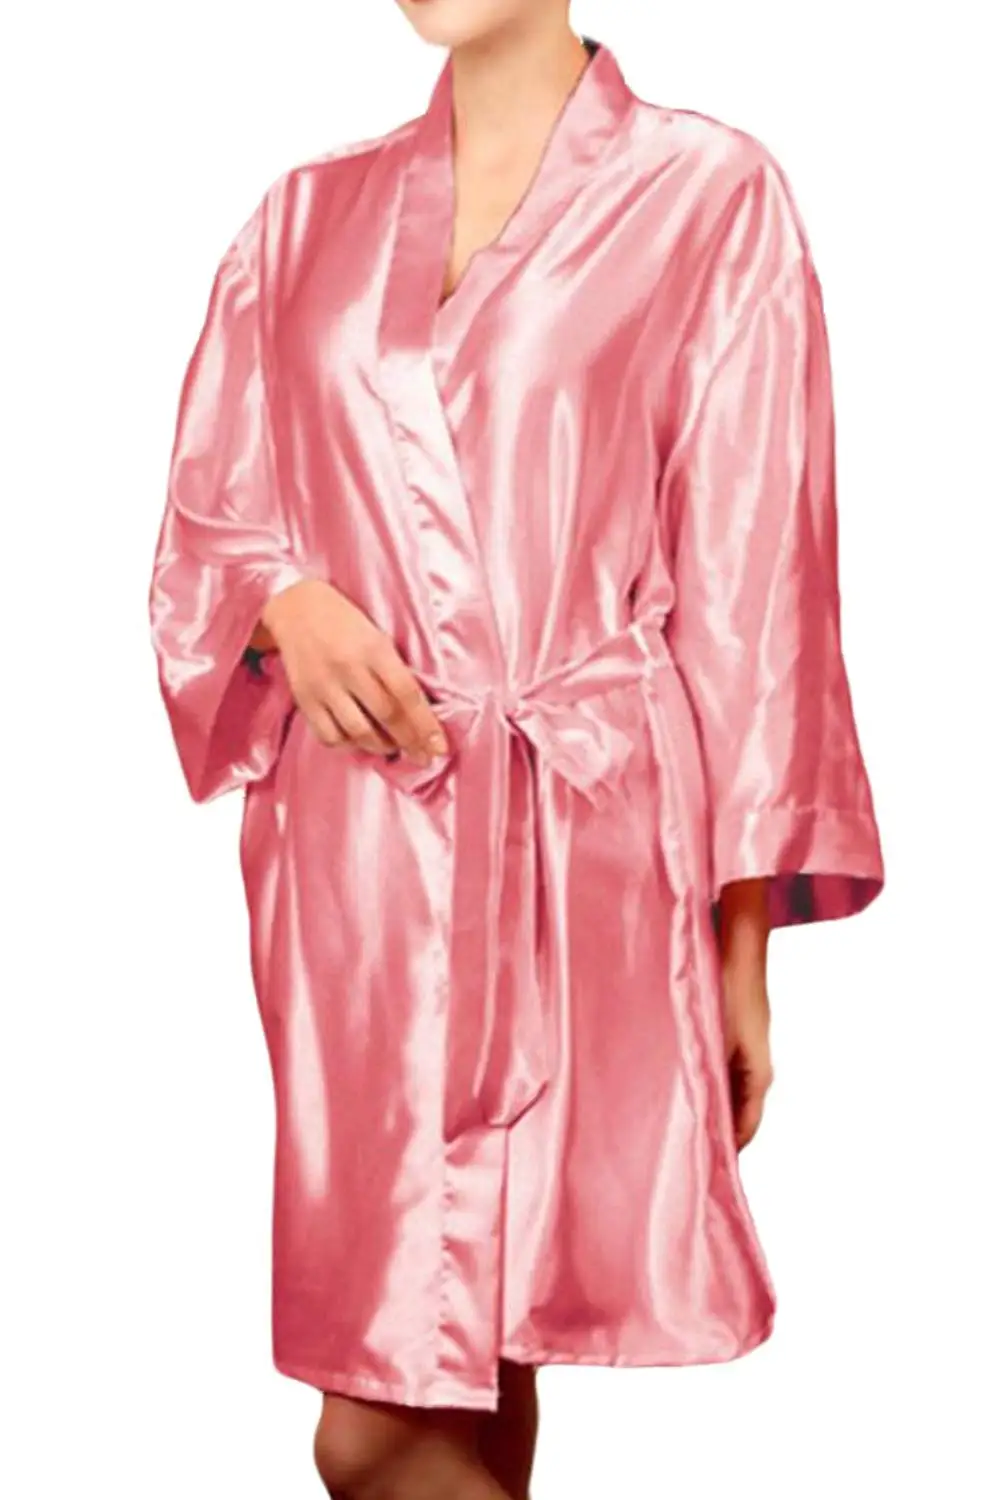 Cheap Nylon Nightgowns For Men Find Nylon Nightgowns For Men Deals On